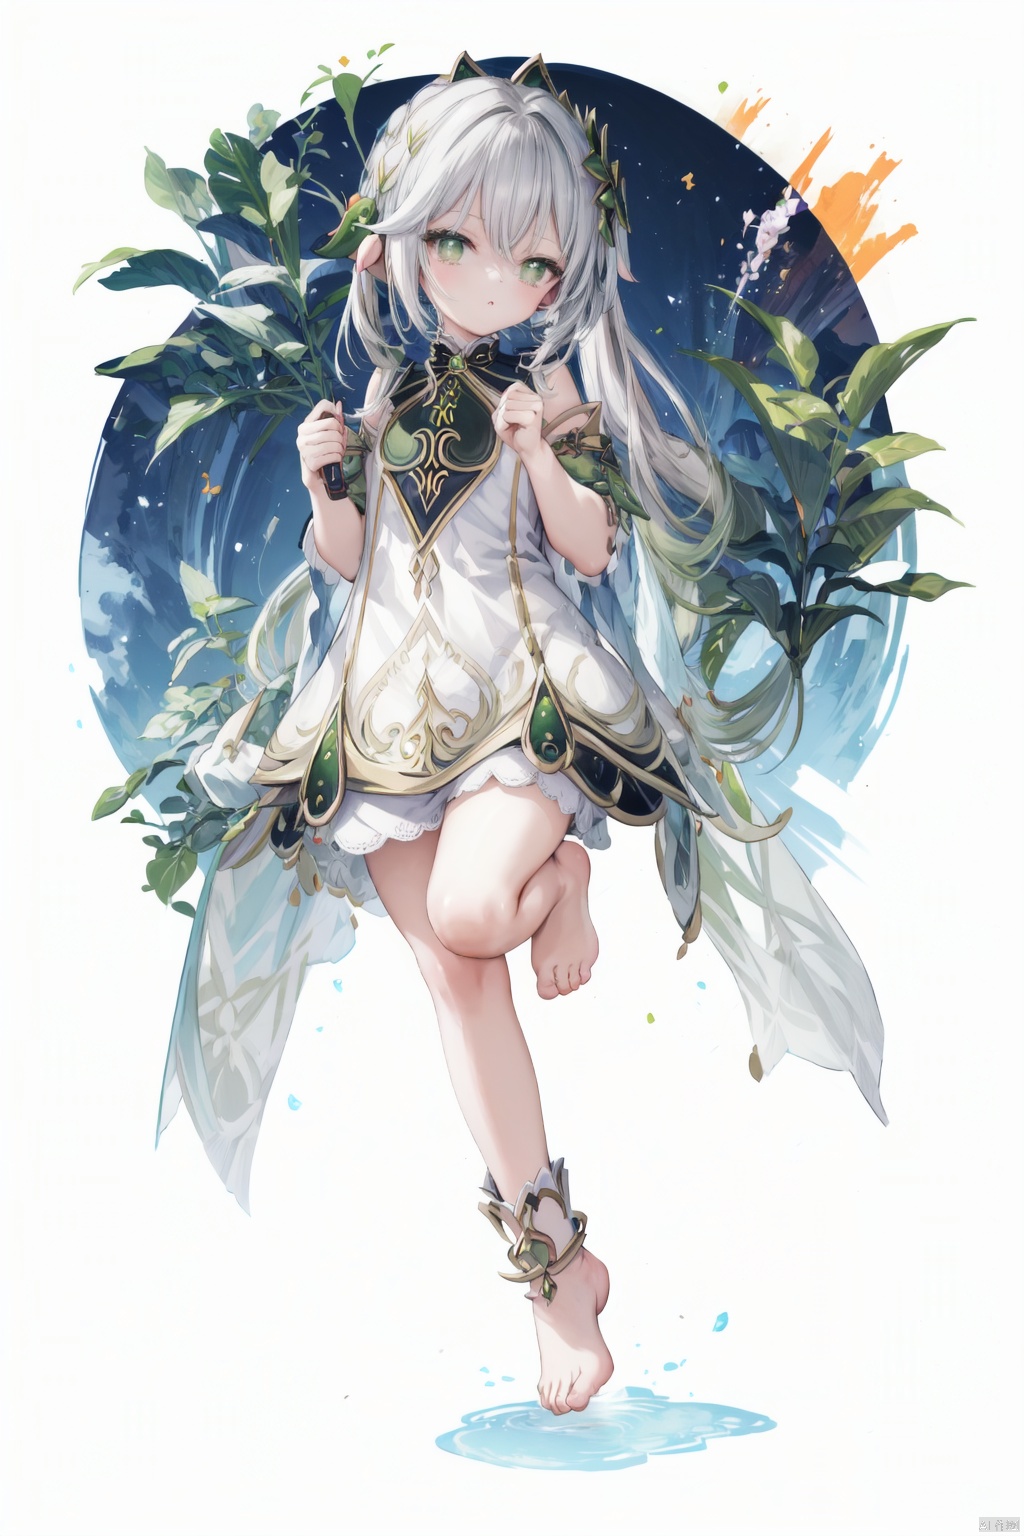  best_quality, extremely detailed details, loli,1_girl,solo,full_body,cute_face,pretty face,extremely delicate and beautiful girls,(beautiful detailed eyes), green_eyes,cross_eyes,+_+,(white and green hair:0.8),long_ponytail,barefoot,
hanfu,standing,
nahida (genshin impact), nahida (genshin impact),YuanShen, watercolour, colors, blank background